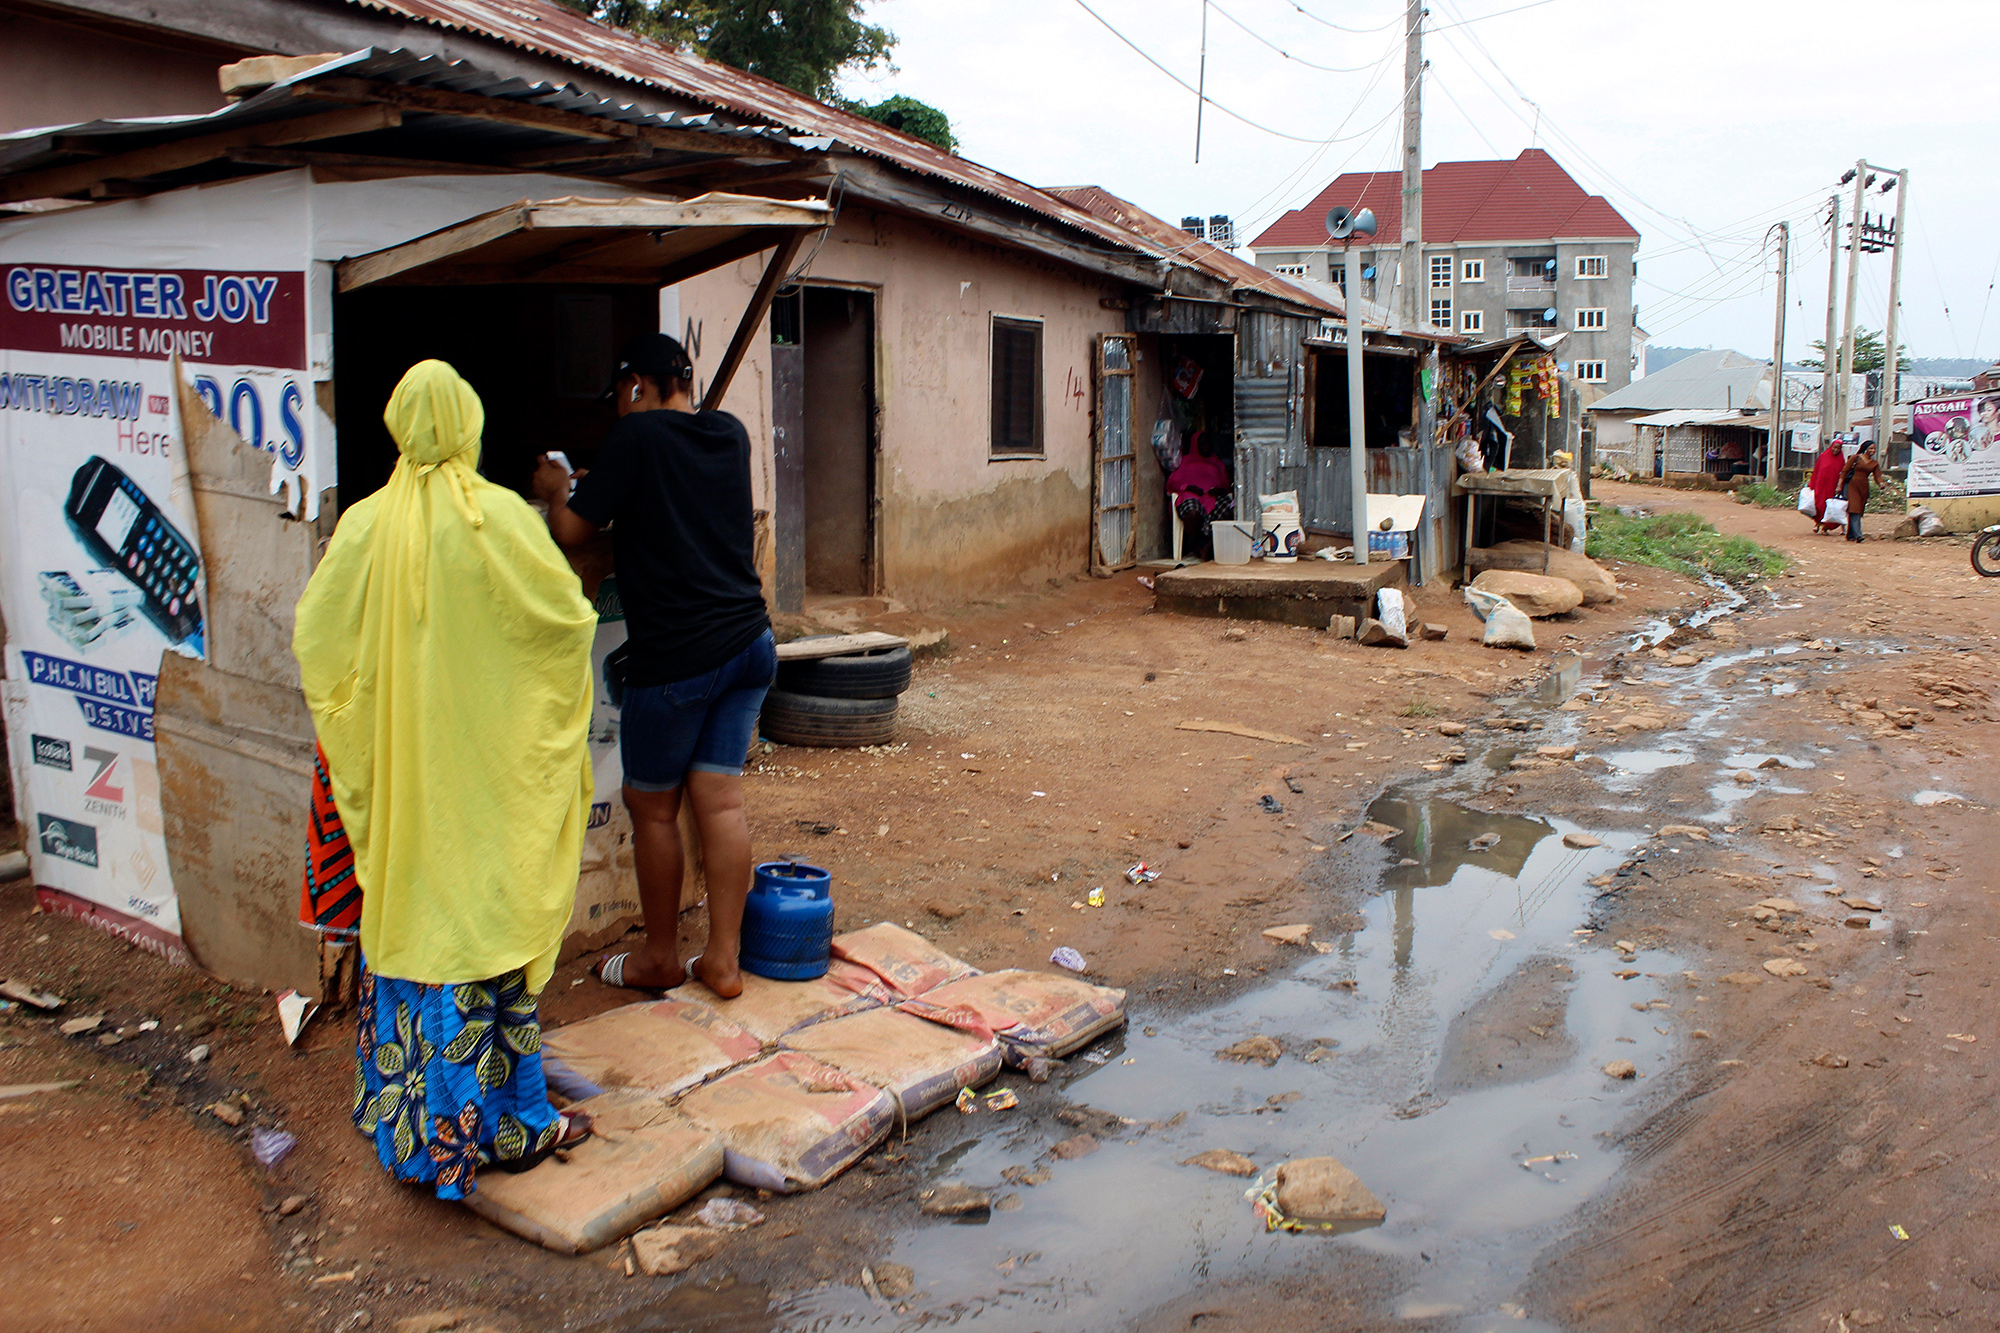 Sewage water runs past a stall in Abuja, Nigeria, on Sept. 3.